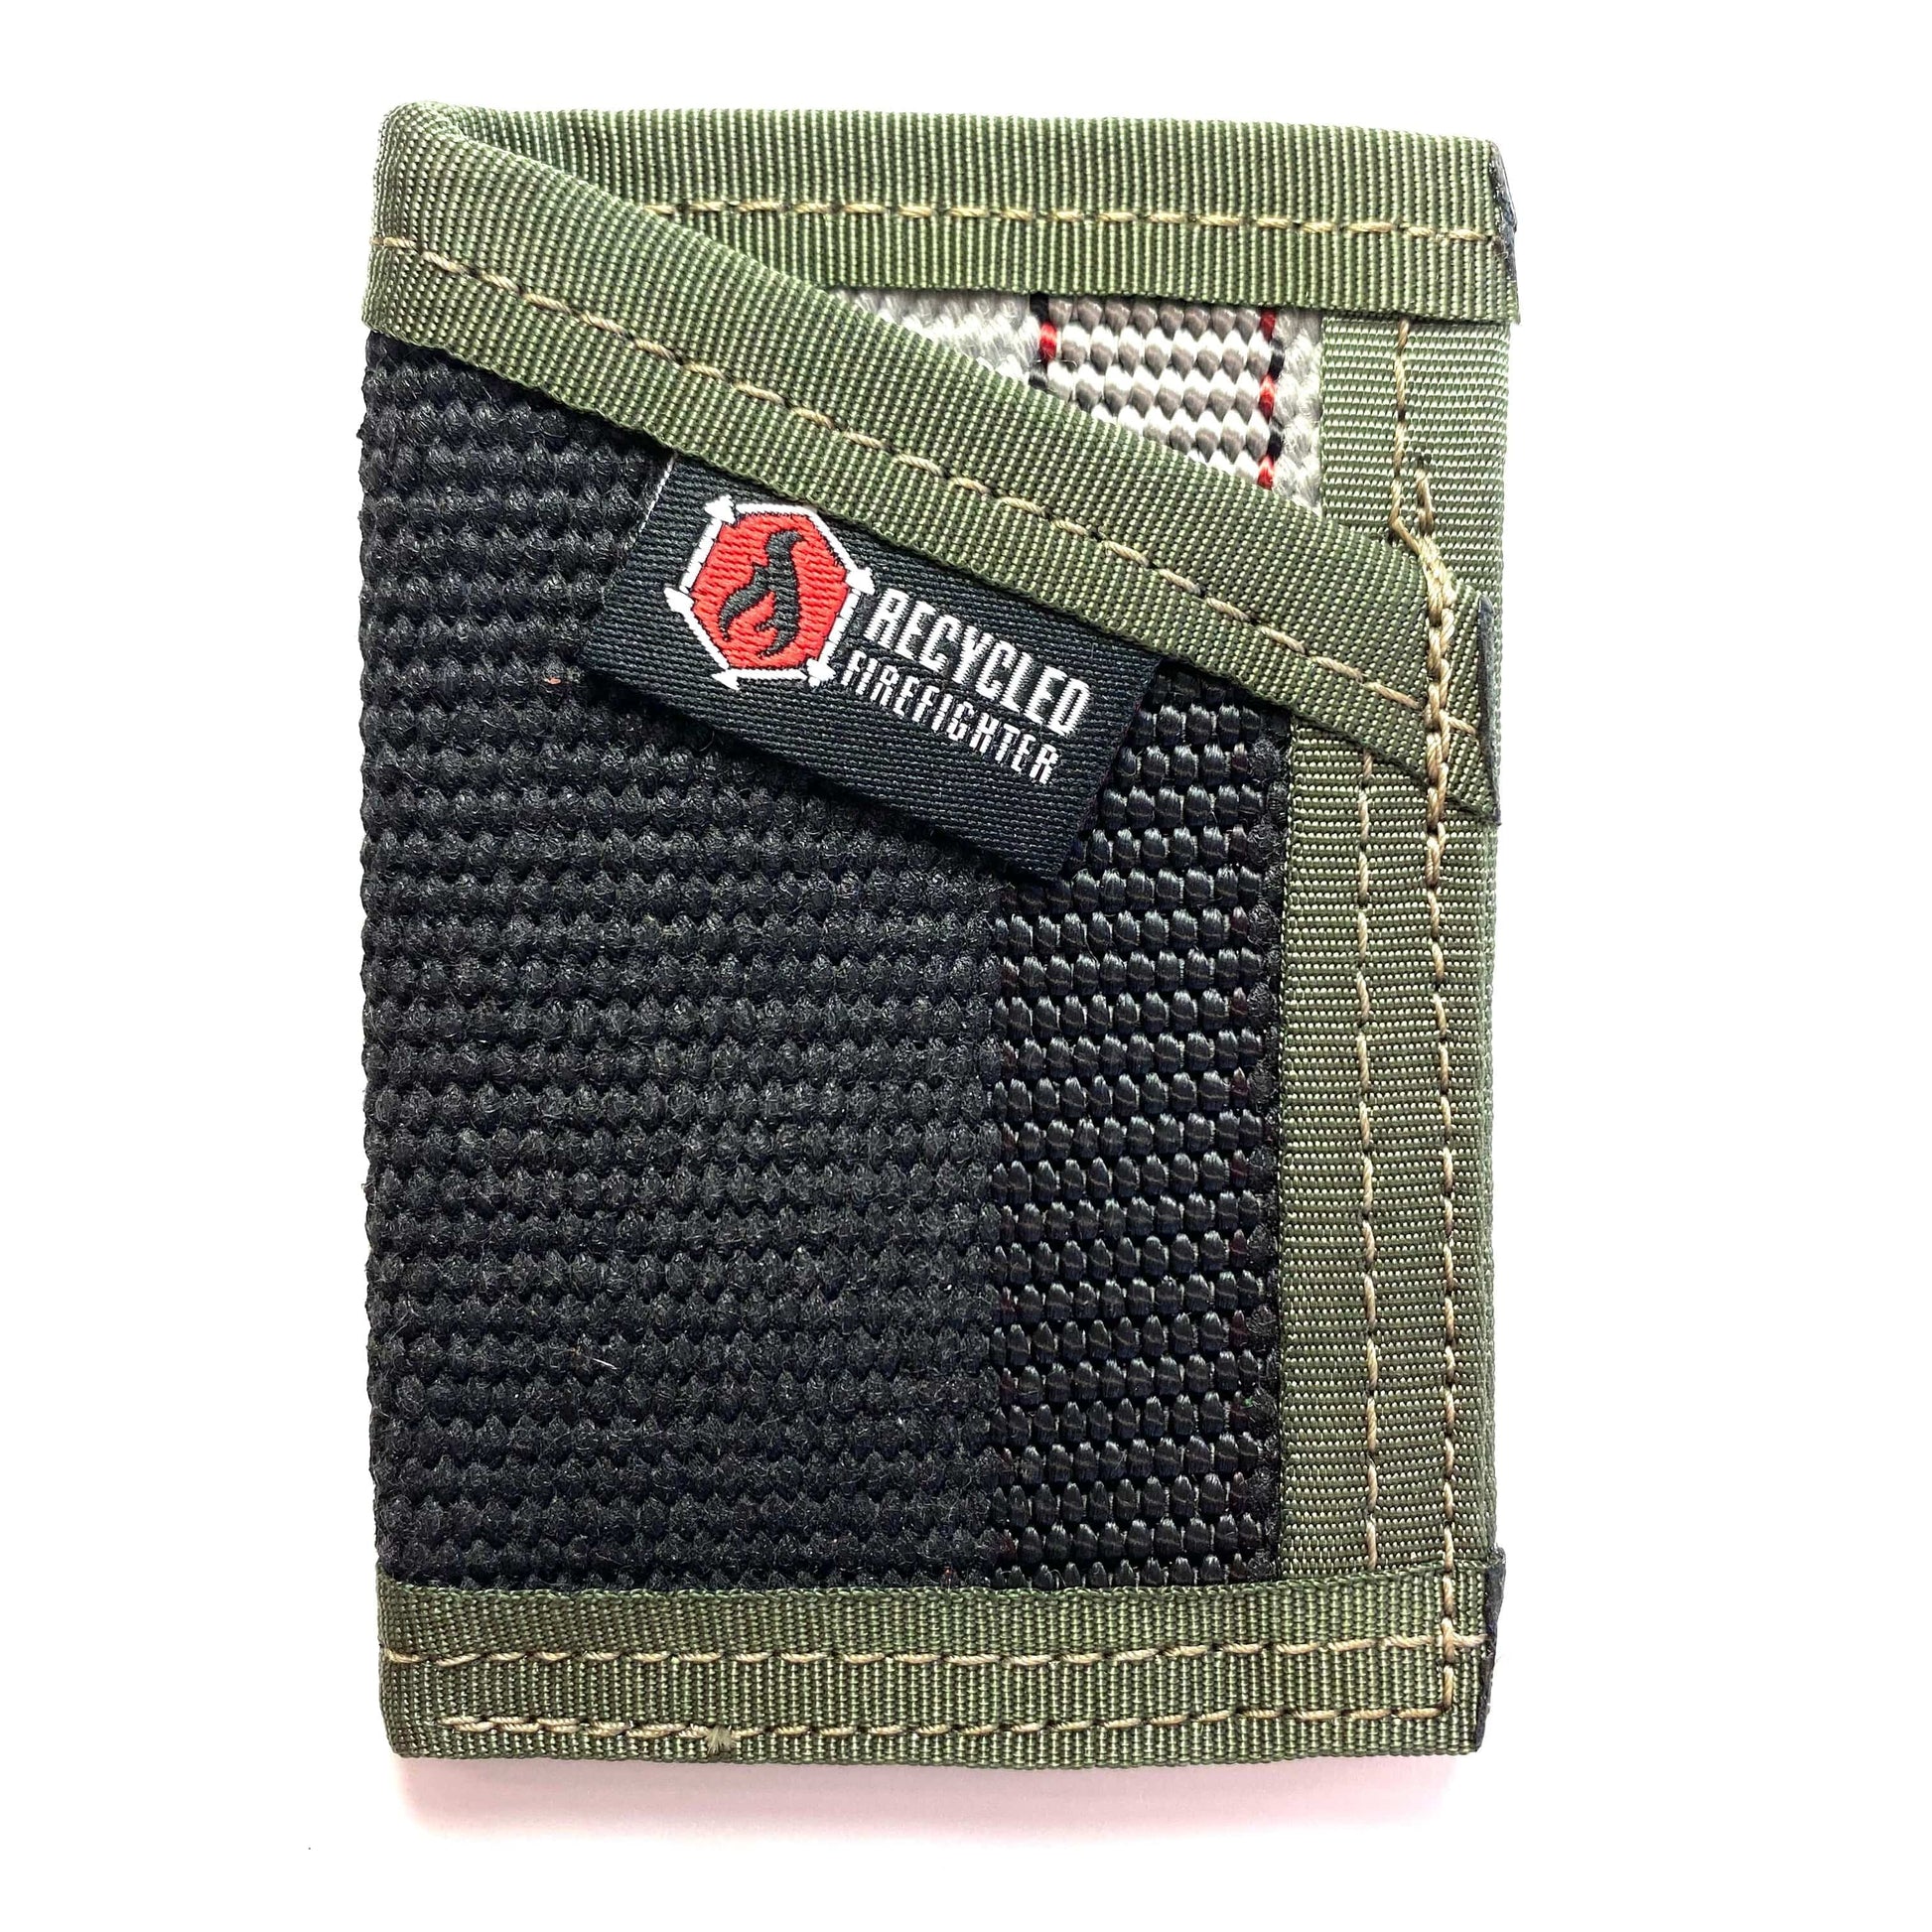 Chief Miller Wallet "The Sergeant" Apparel